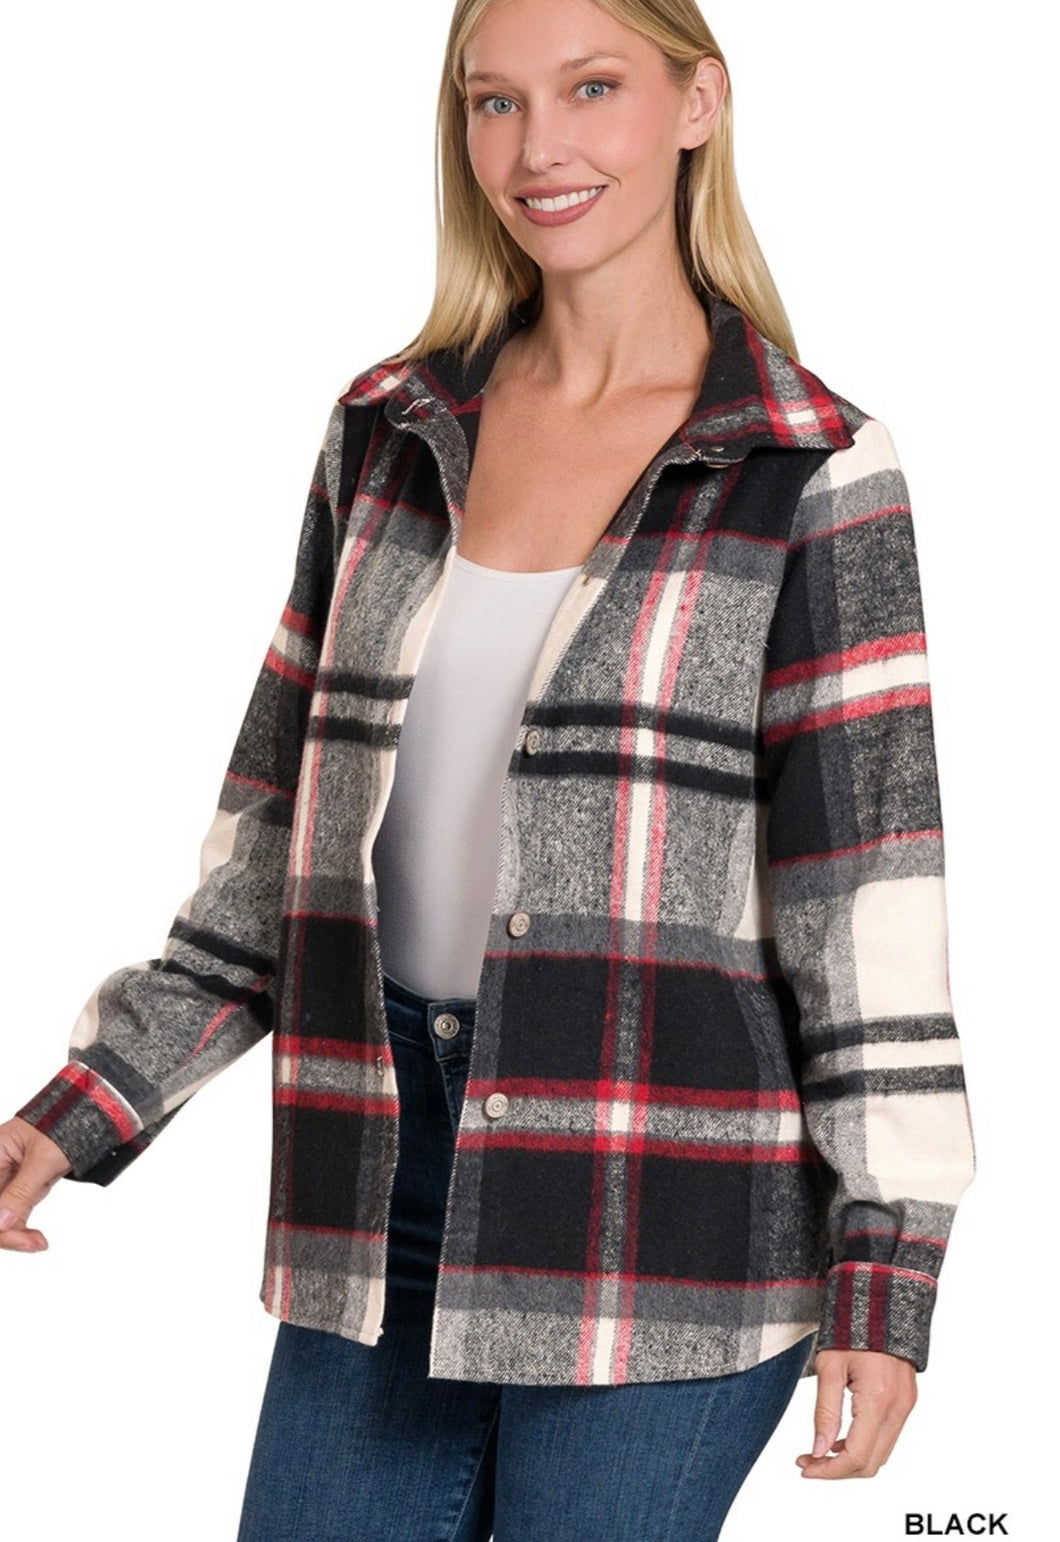 YARN DYED PLAID SHACKET -Black and Red